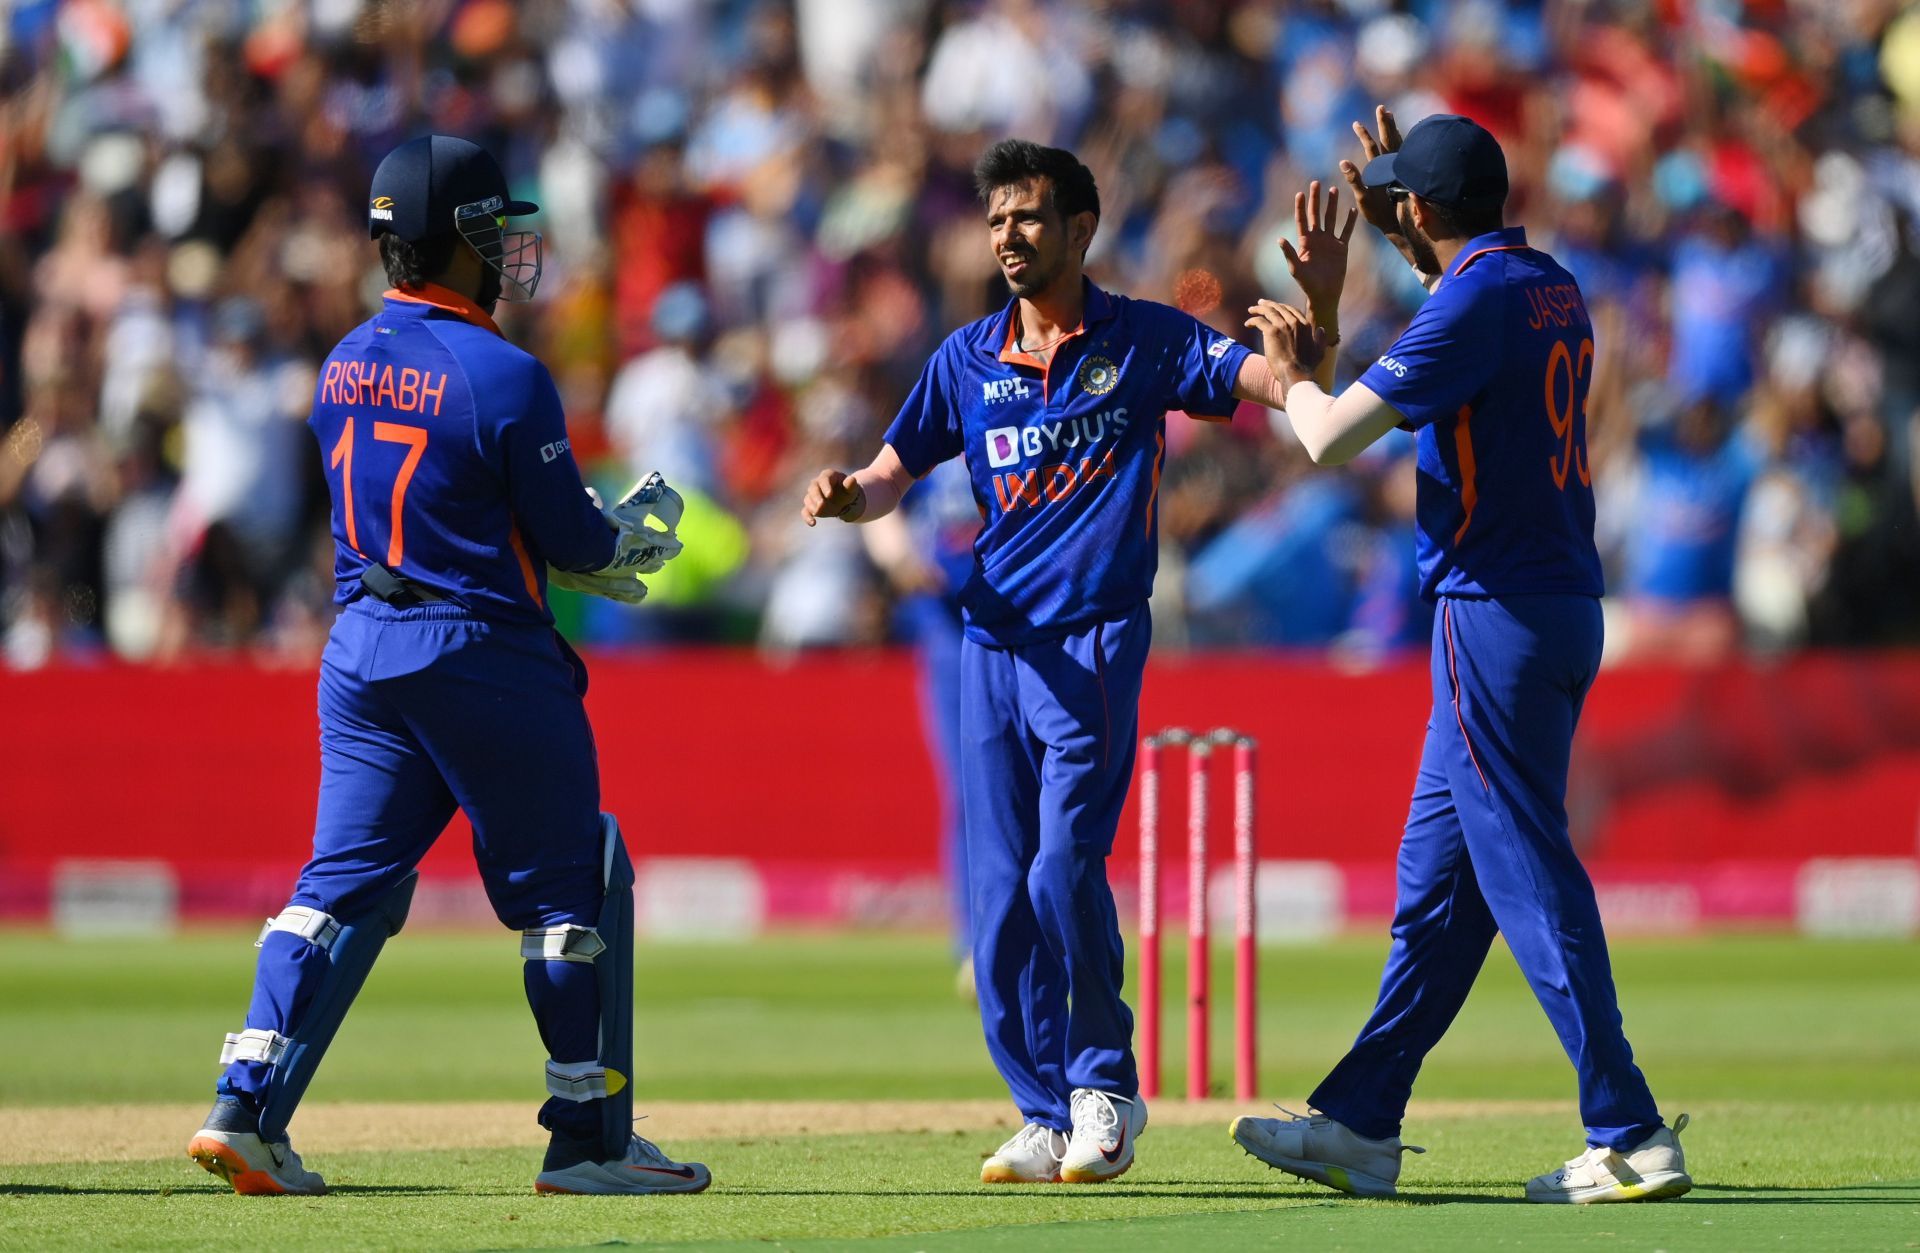 Yuzvendra Chahal picked up four wickets in the second ODI against England